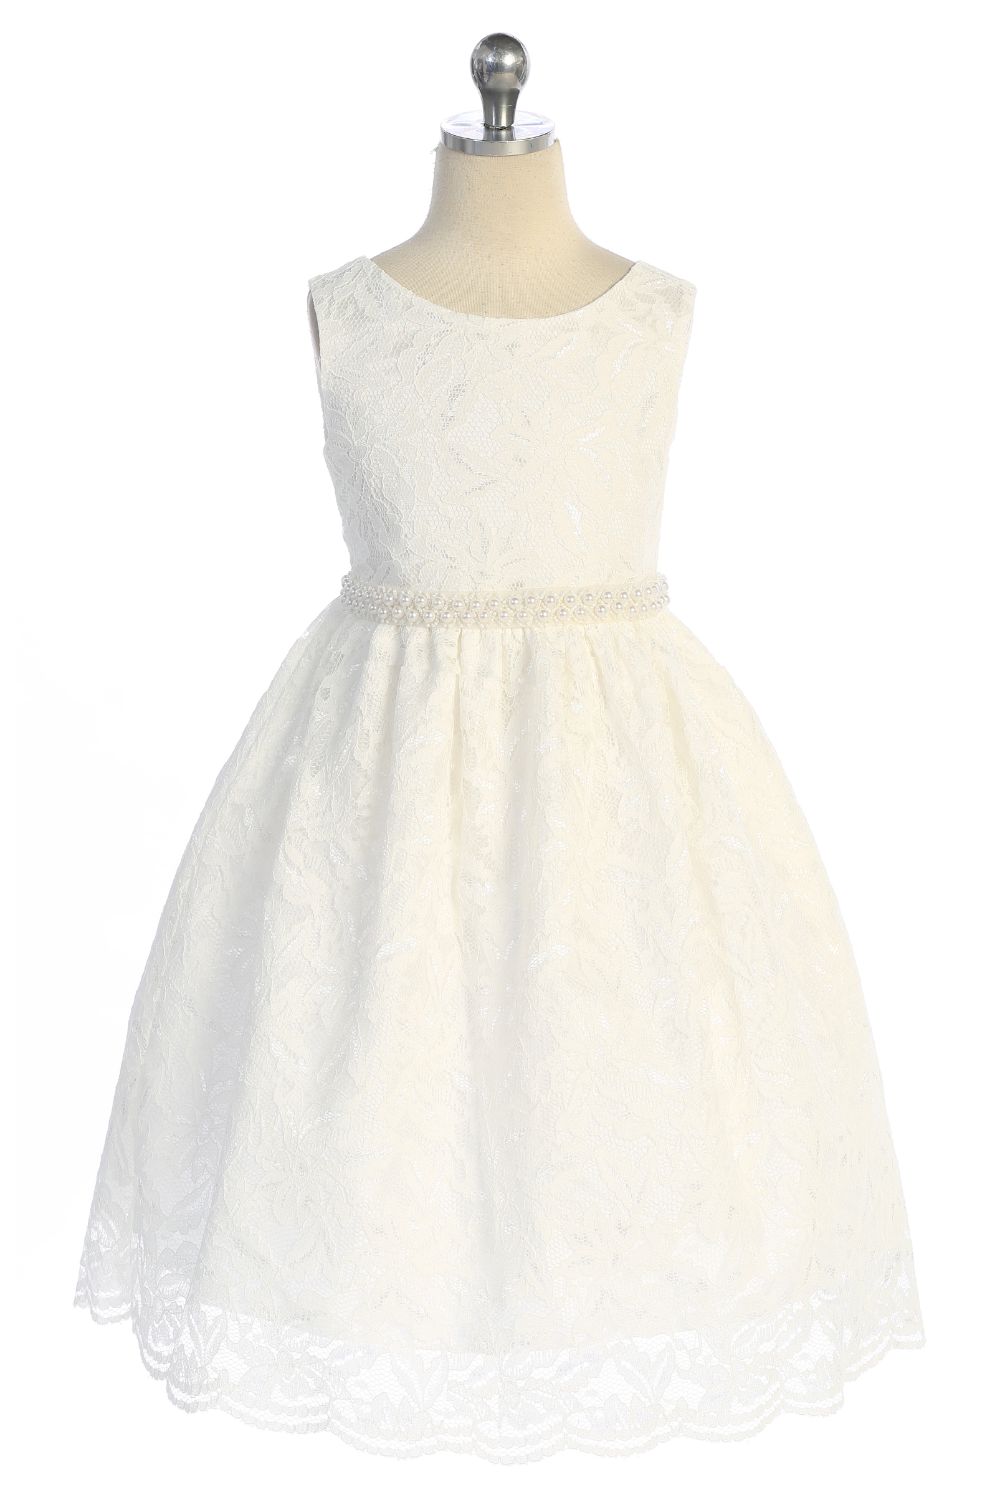 526-C- Lace V Back Bow Dress w/ Thick Pearl Trim